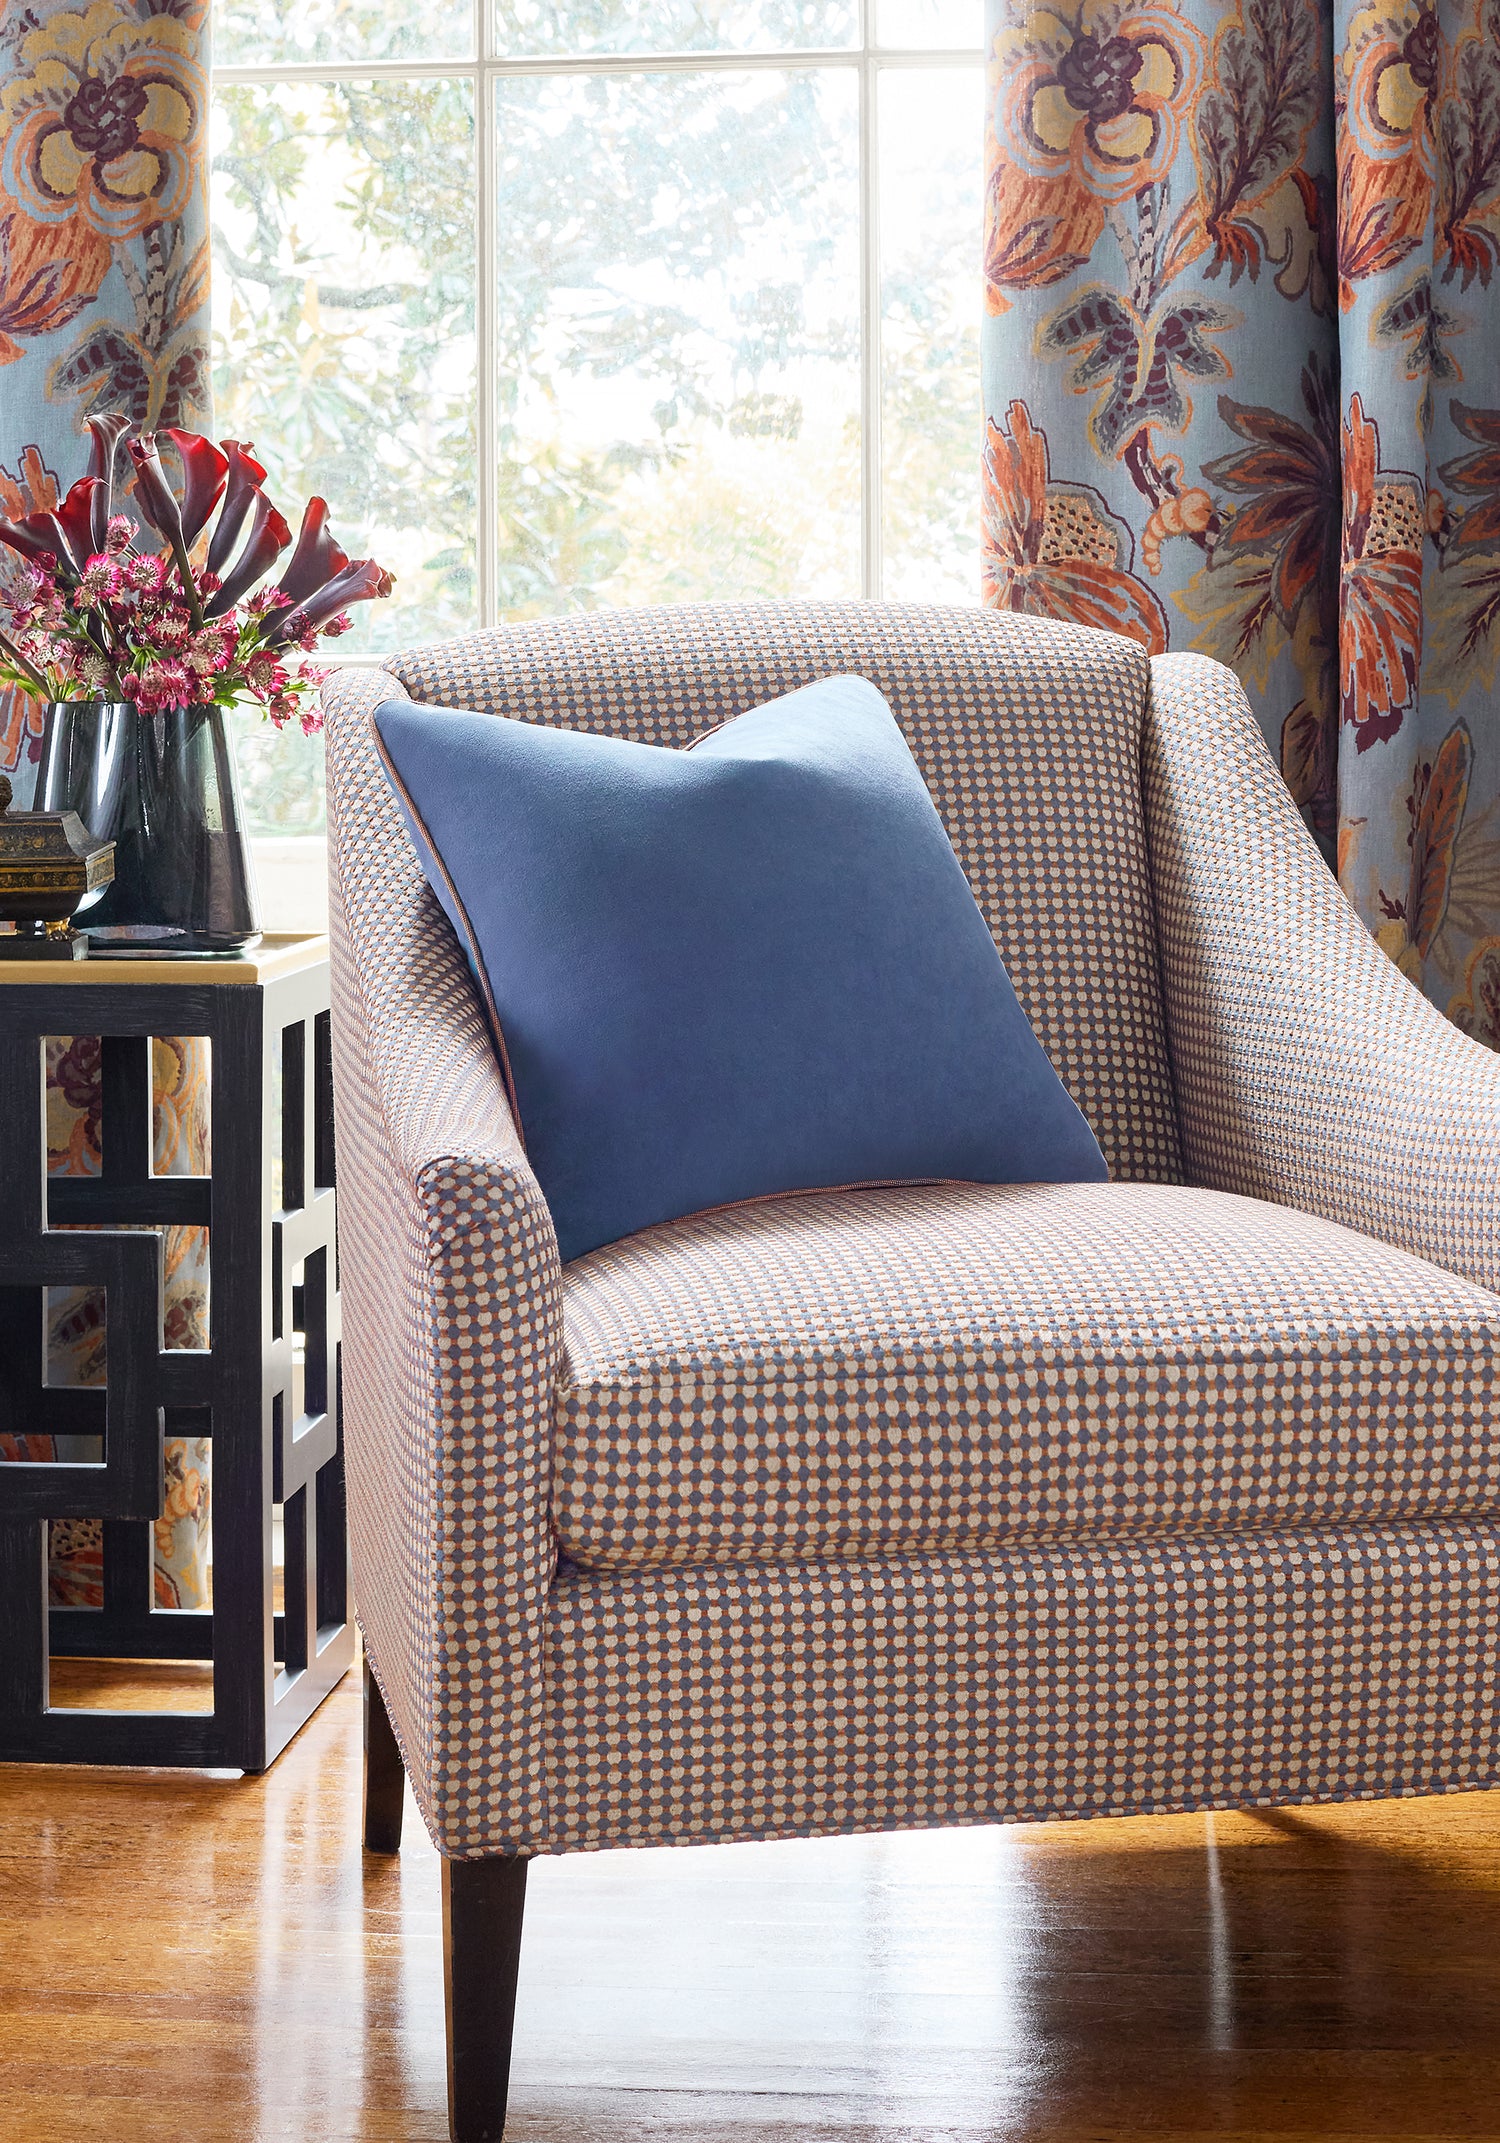 Stanwick Chair in Darcy woven fabric in campfire color - pattern number W81924 by Anna French in the Bristol collection